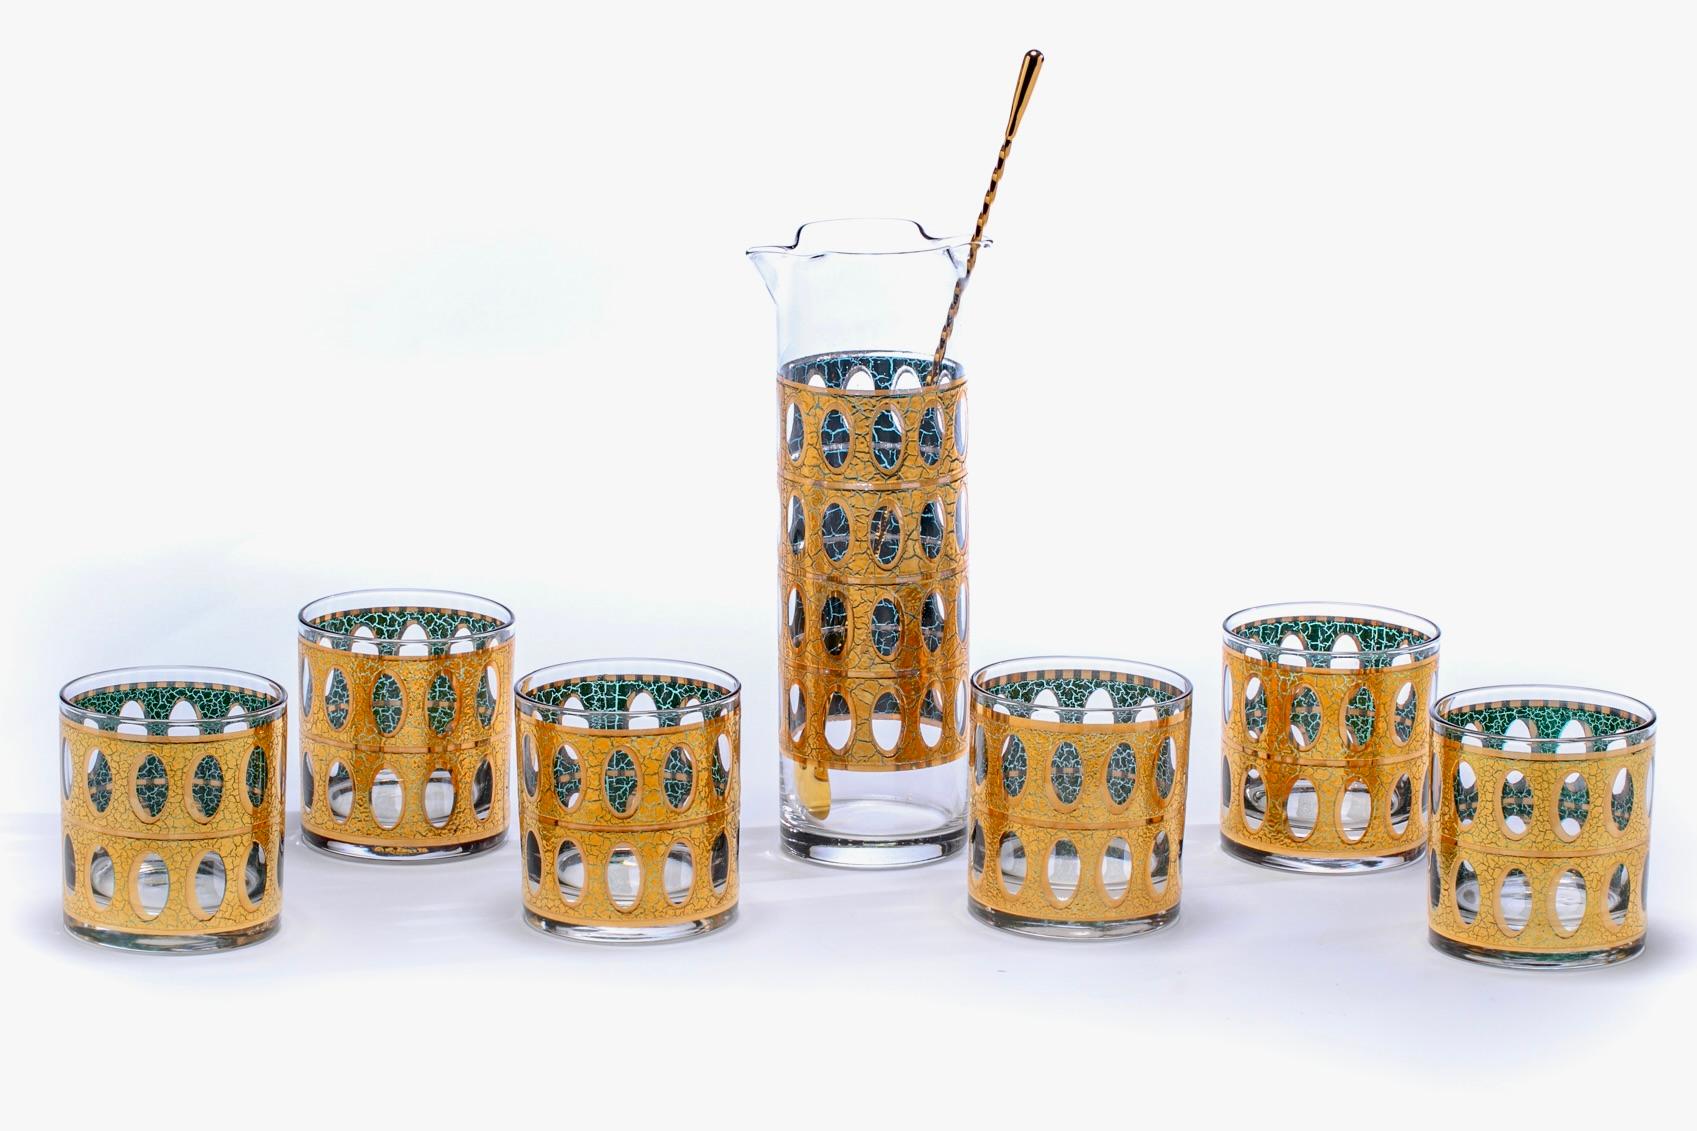 Mid Century Modern 22K Gold Cocktail Mixer and Set of 6 Rocks Glasses, c. 1965 For Sale 3